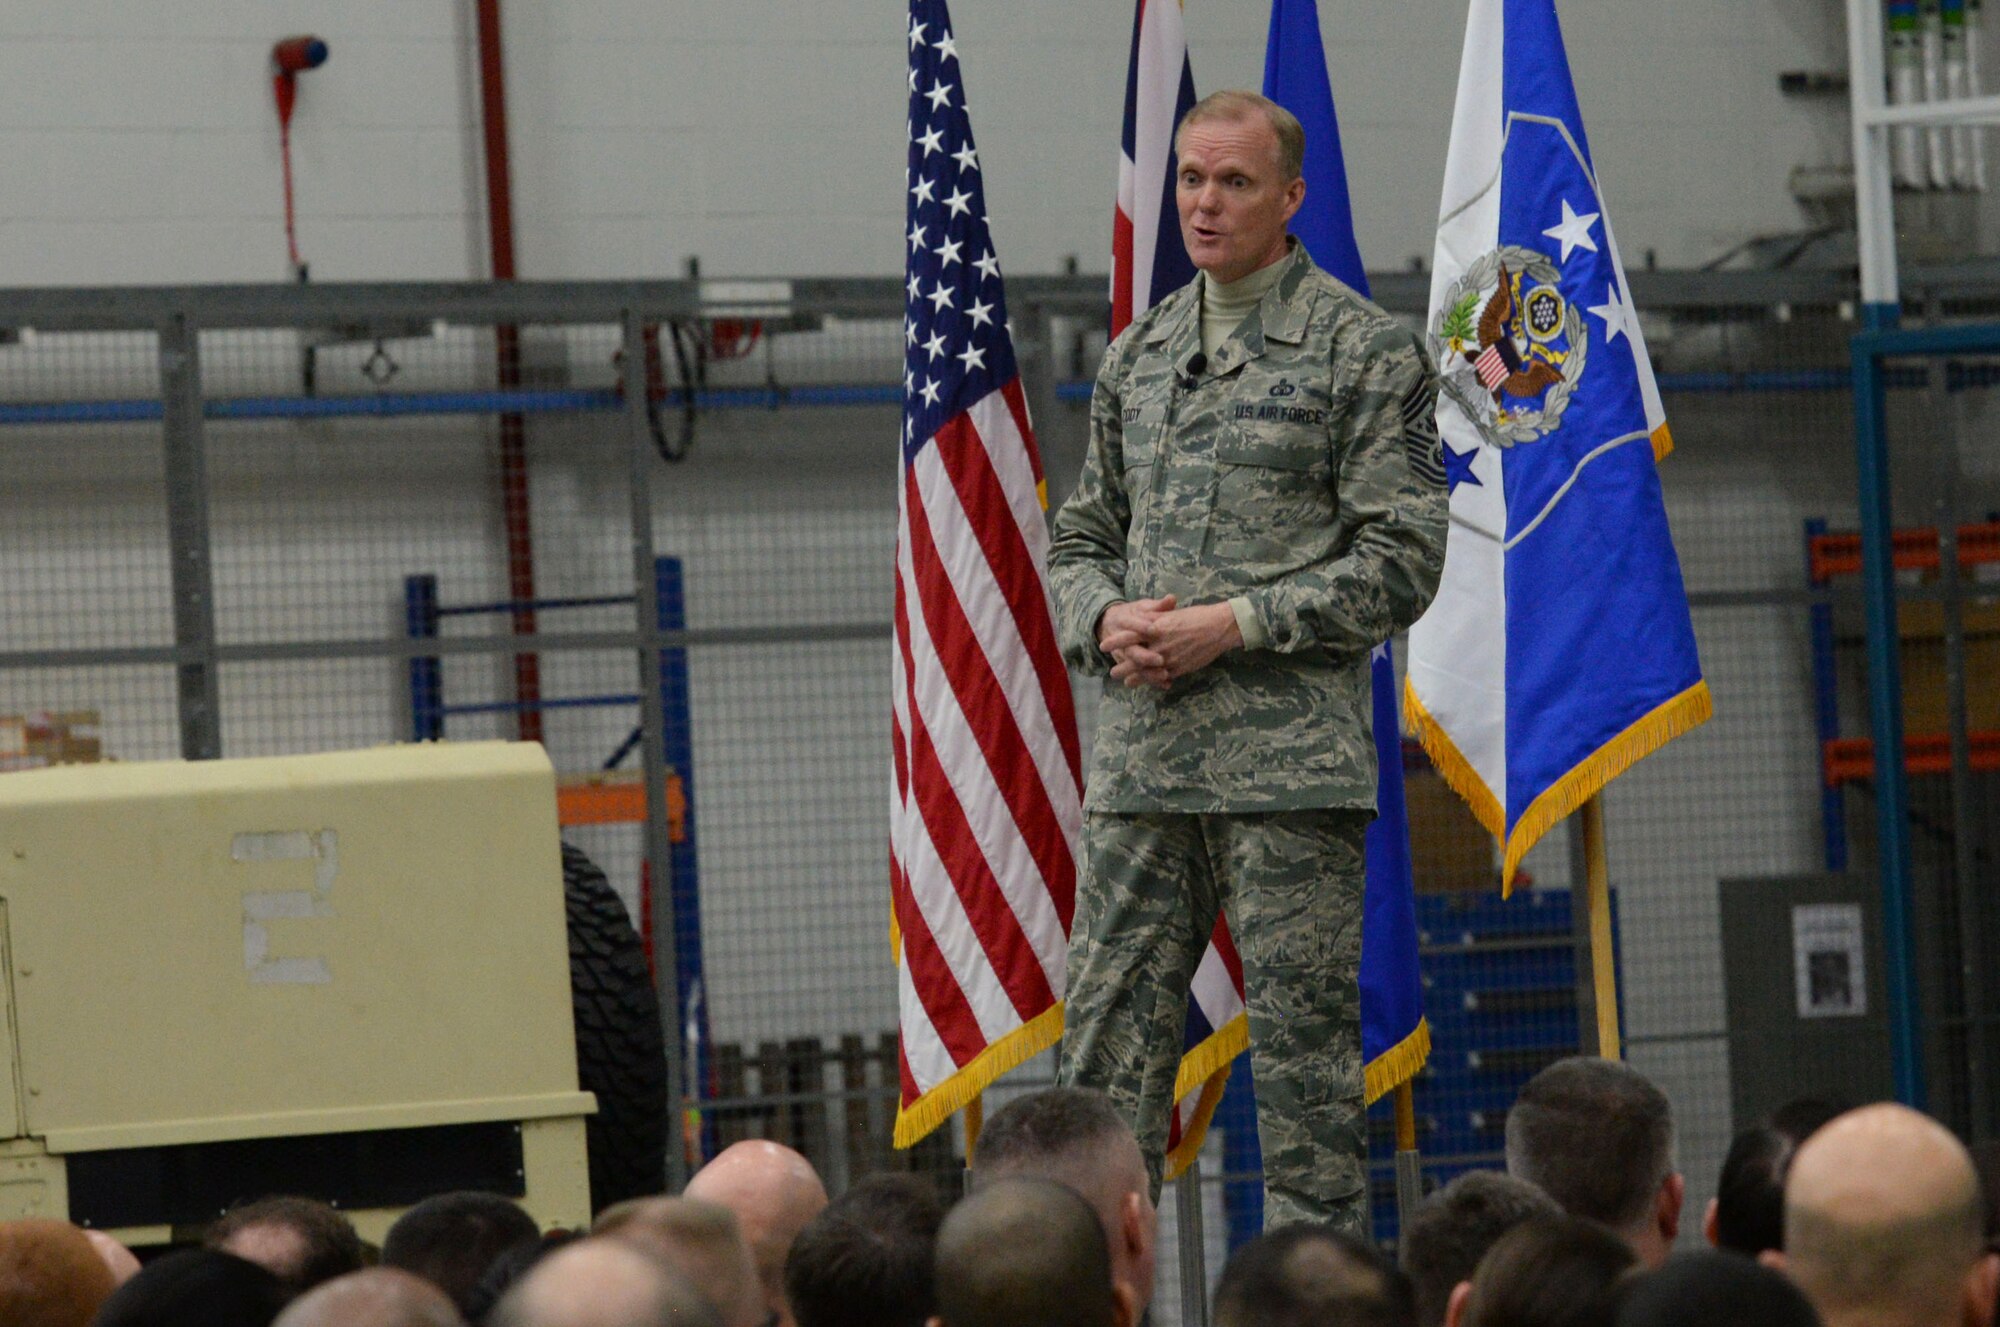 Chief Master Sgt. of the Air Force James Cody speaks to Airmen during an all call Jan. 27, 2016, on RAF Mildenhall, England. Cody addressed the importance of interpersonal relationships and the importance of each Airman’s contribution to the mission. (U.S. Air Force photo by Airman 1st Class Justine Rho/Released)